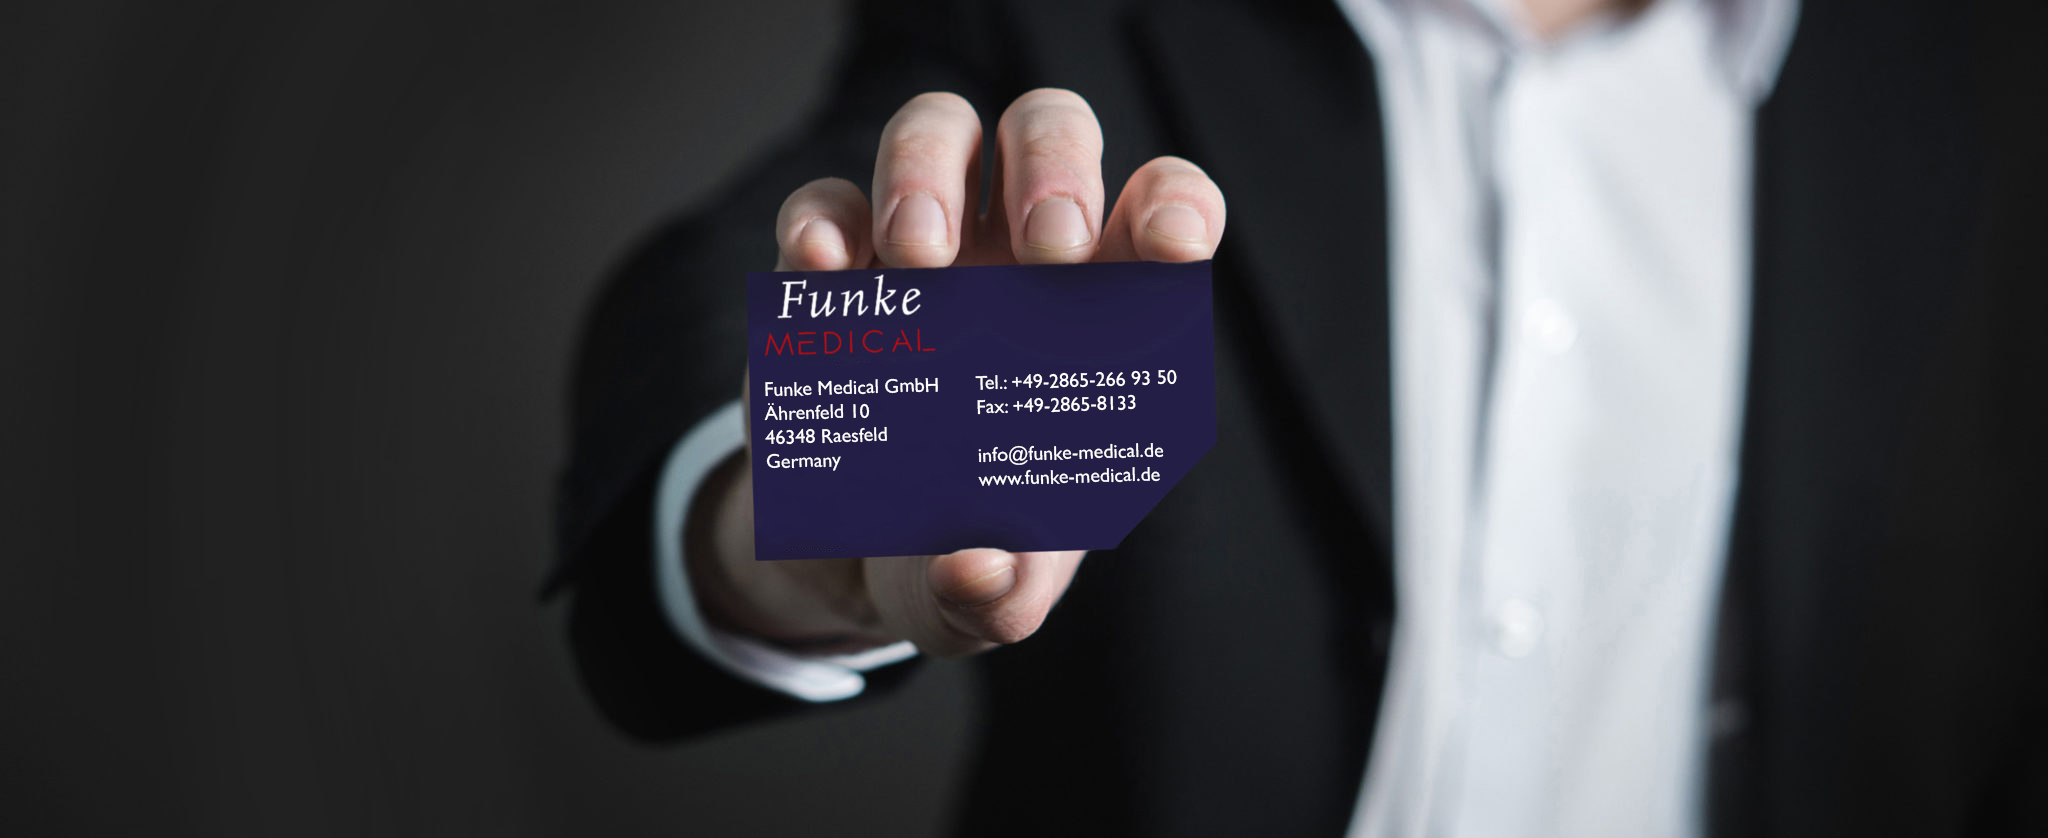 Man in suit holds a Funke Medical business card into the camera